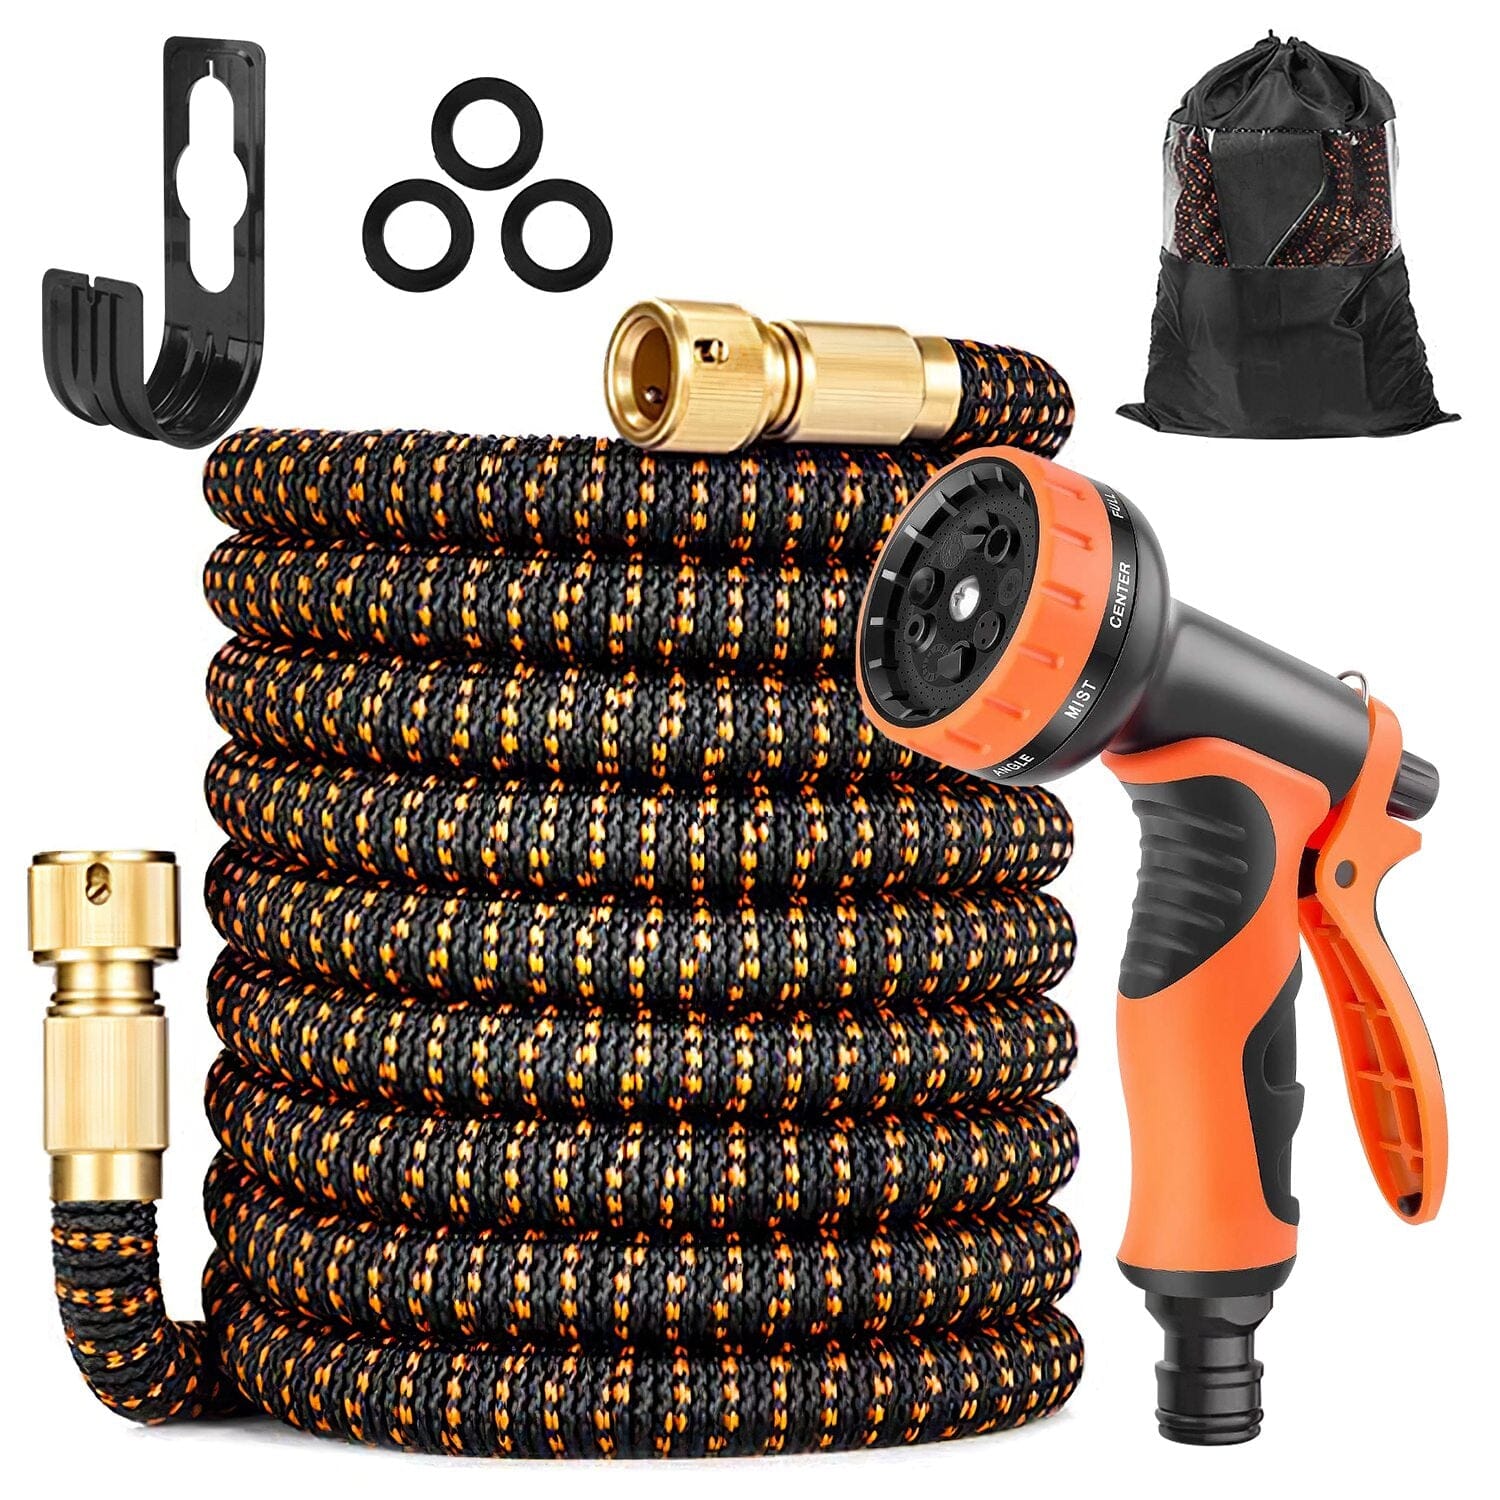 Garden Hose Watering Kit with Spray Nozzle